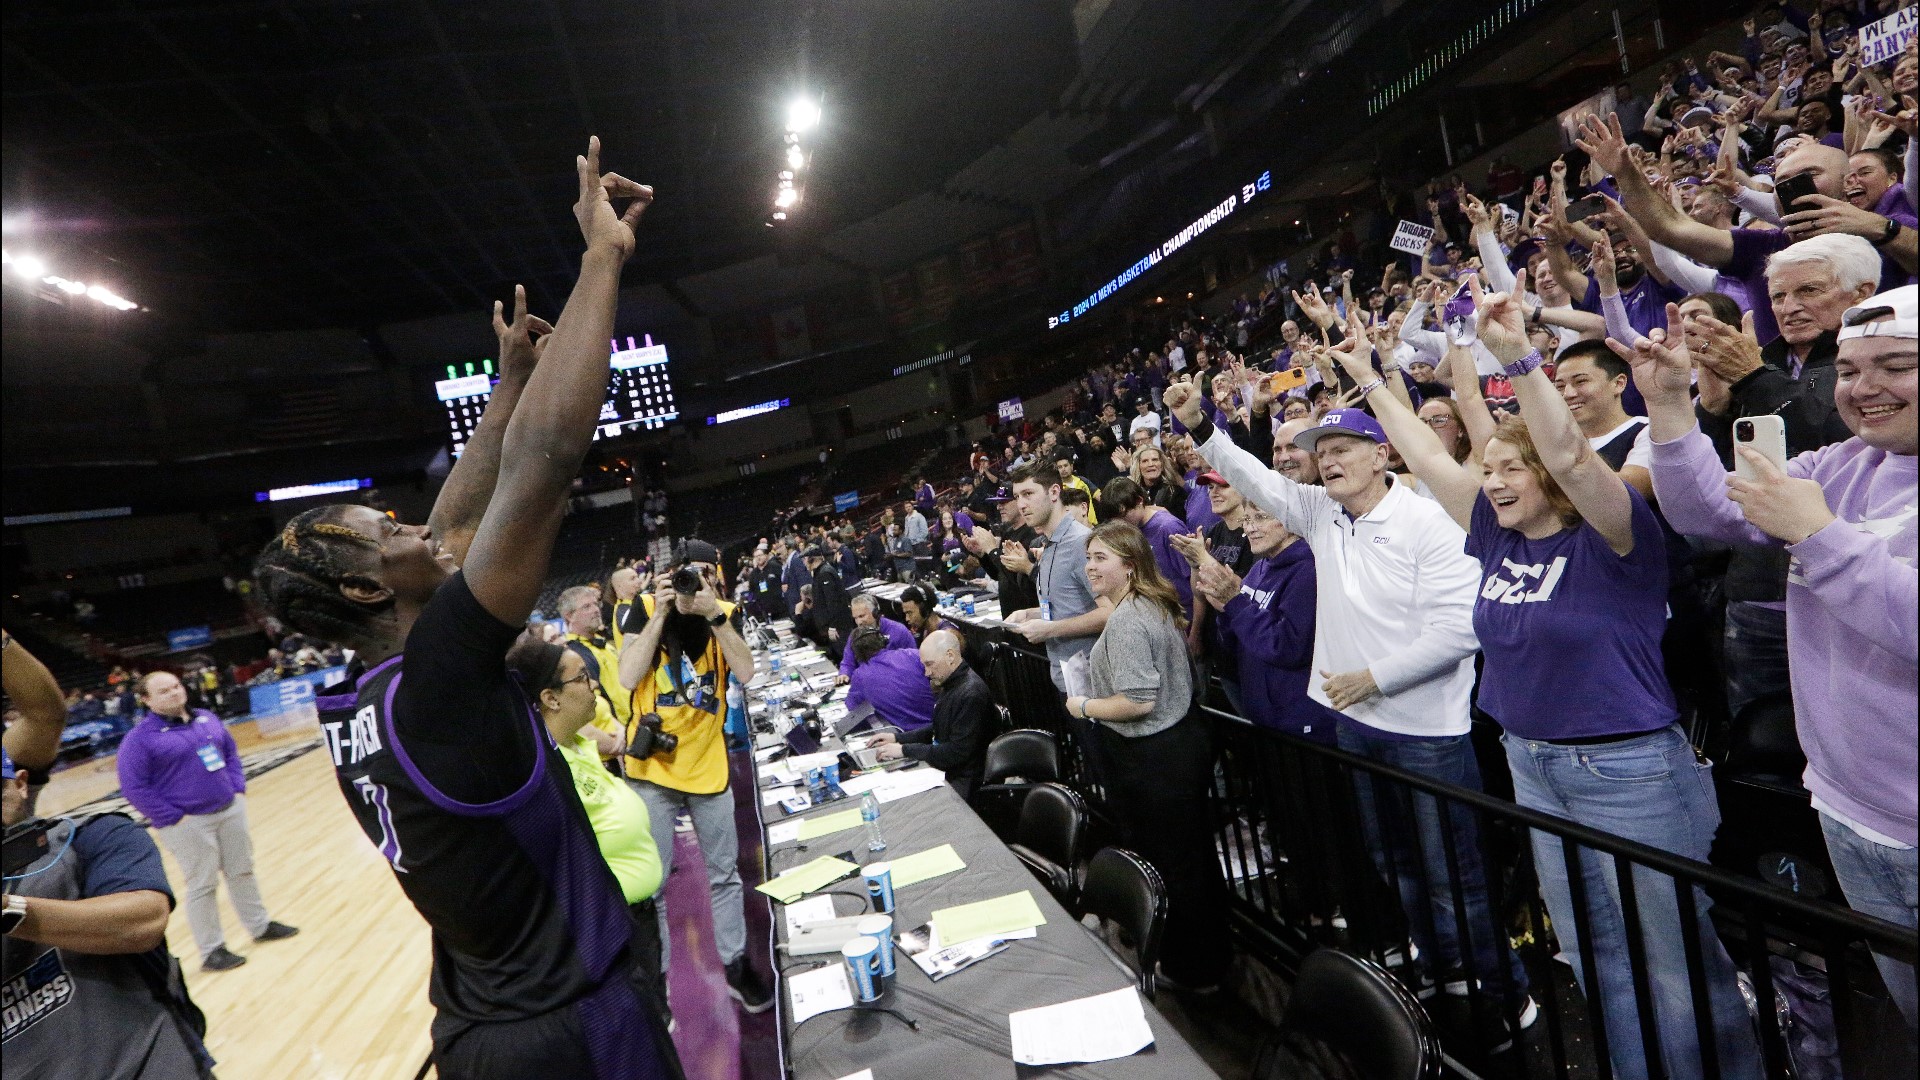 Grand Canyon became the second No. 12 seed to pull a late-night upset after James Madison took down Wisconsin, and 12News caught up with fans after the game.